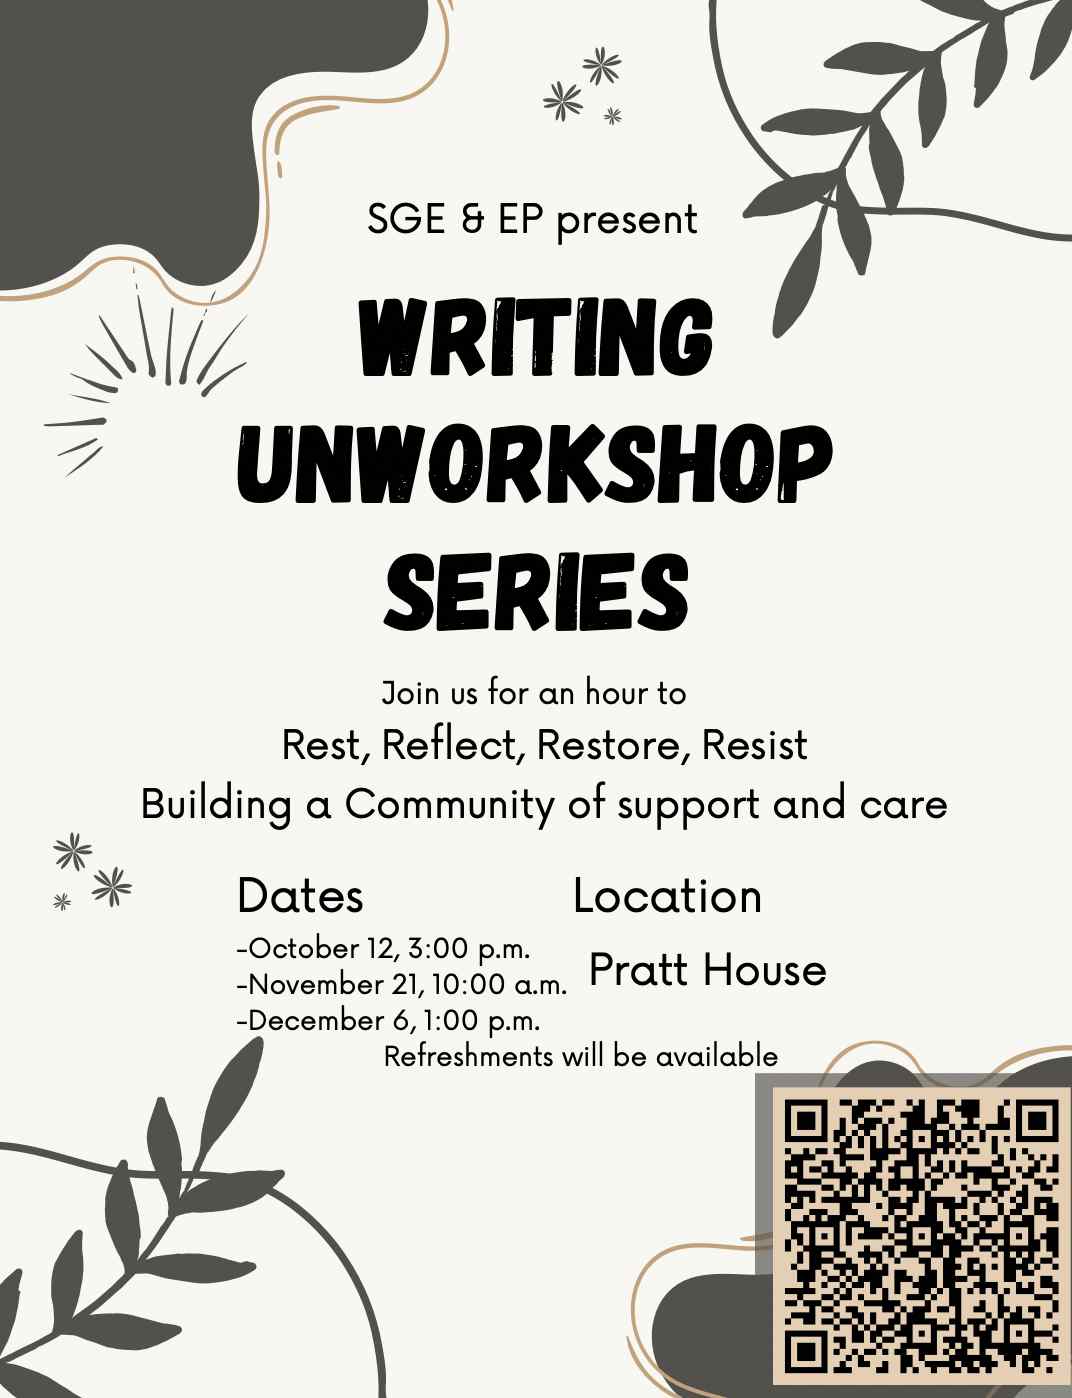 A poster with the text "Writing Unworkshop Series: Join us for an hour to Rest, Reflect, Restore, Resist Building a Community of support and care".